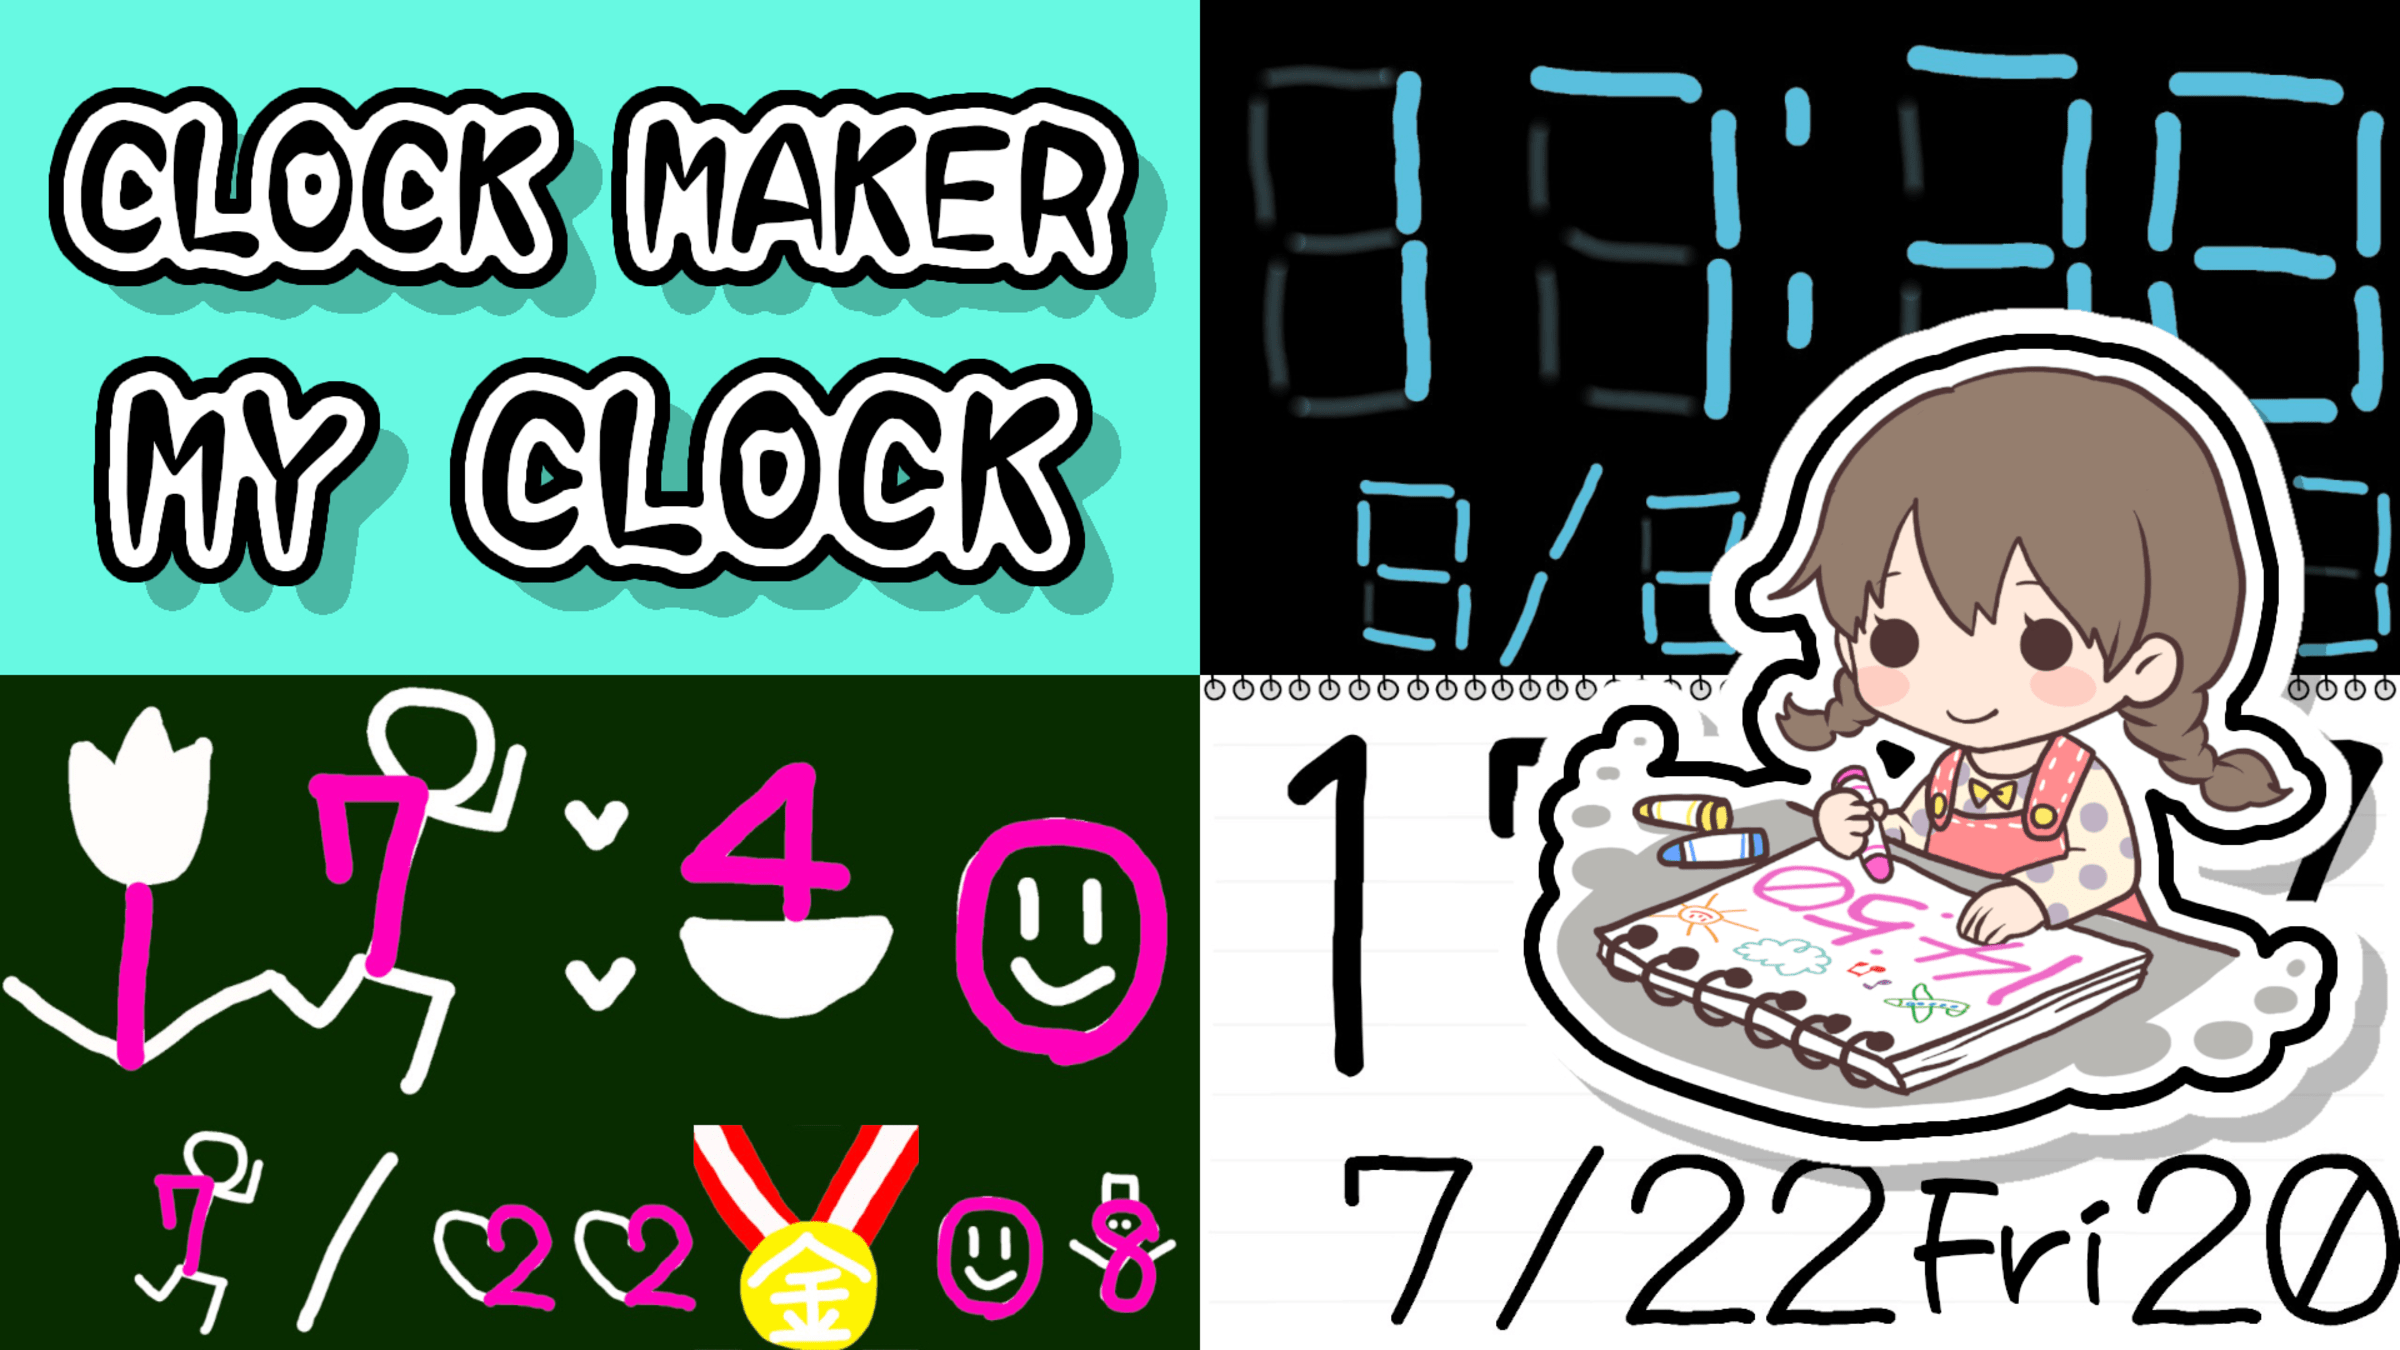 Clock Maker : My Clock - digital (with timer) for Nintendo Switch - Nintendo Official Site